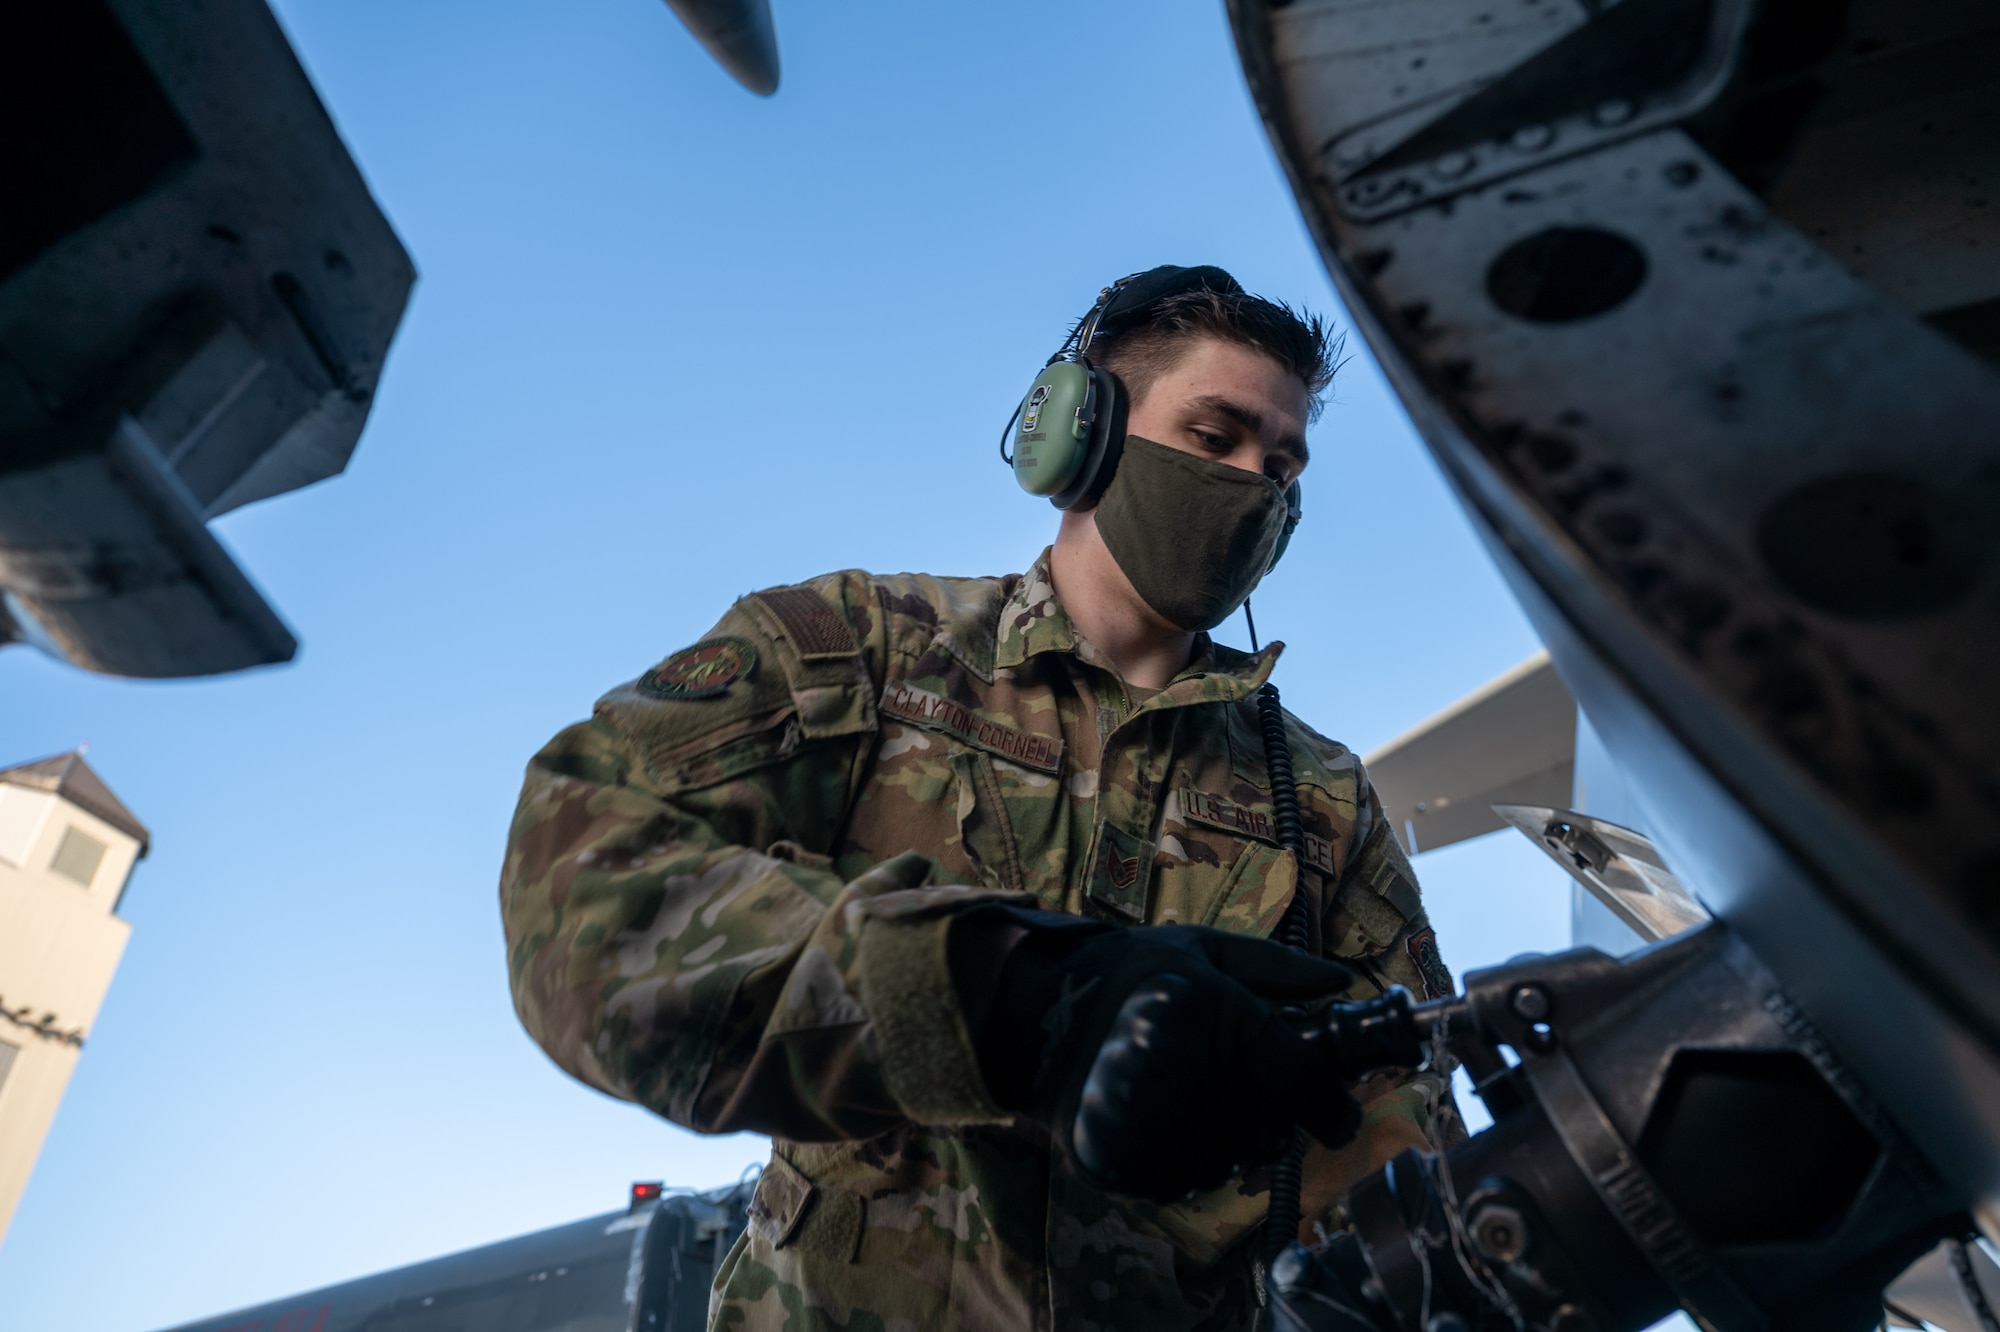 Staff Sgt. Timothy Clayton-Cornell, 736th Aircraft Maintenance Squadron crew chief, Dover Air Force Base, Delaware, attaches a fuel hose to a Dover AFB C-17 Globemaster III during Exercise Mosaic Tiger at Moody AFB, Georgia, Feb. 25, 2021. Airmen from Dover AFB participated in the exercise, testing simulated downrange capabilities to build mission-essential skills to support the needs of Air Combat Command and Air Mobility Command. (U.S. Air Force photo by Airman 1st Class Faith Schaefer)